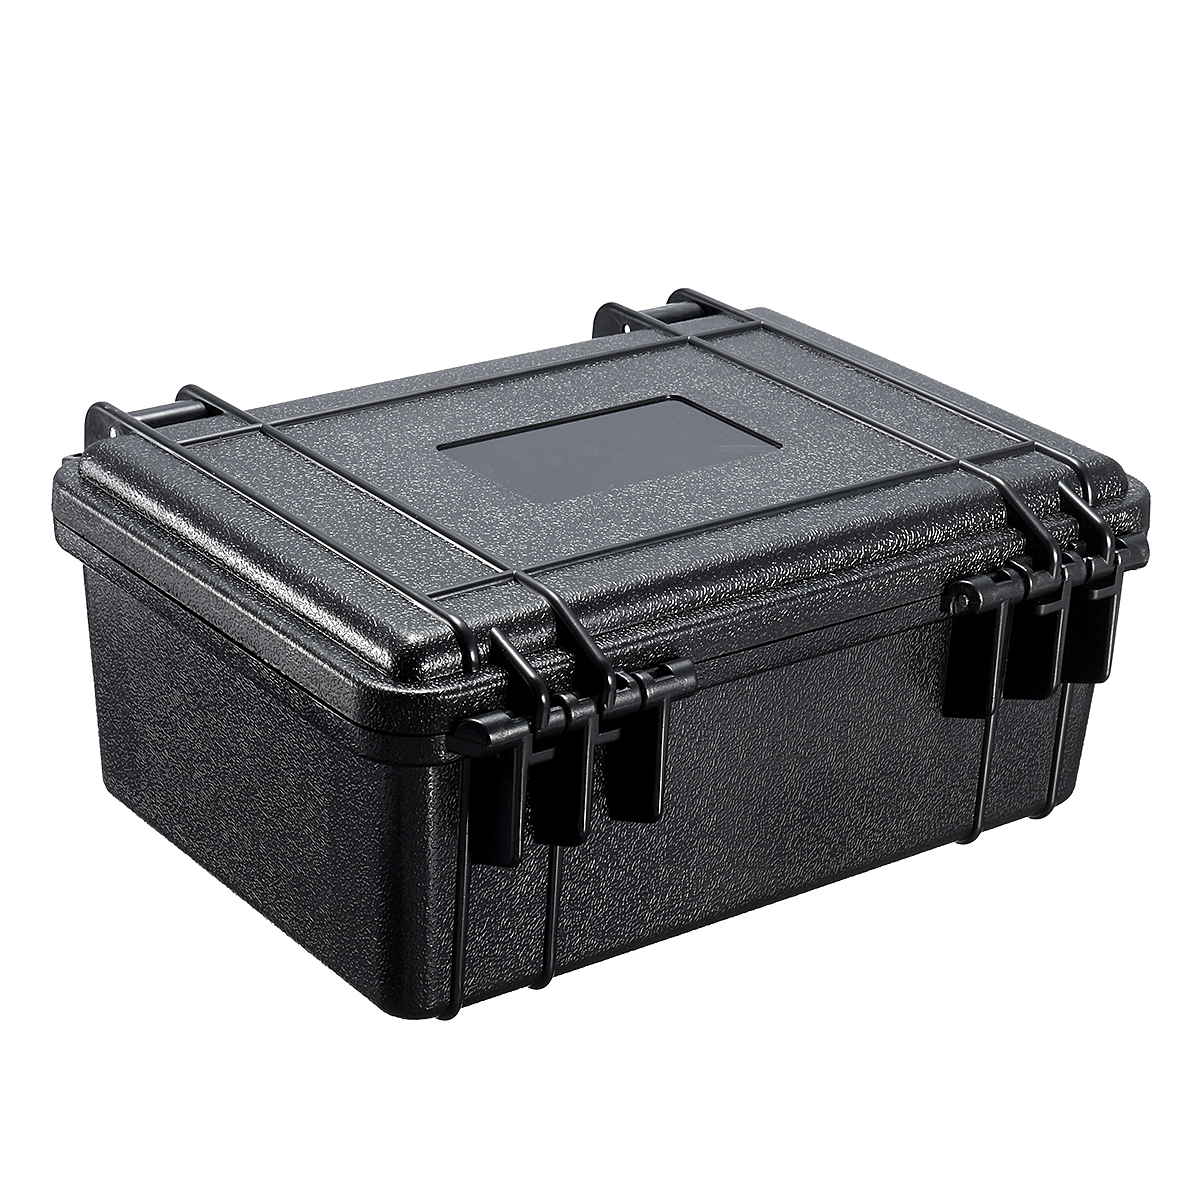 Find 210x165x85mm Waterproof Hard Carry Camera Lens Photography Tool Case Bag Storage Box with Sponge for Sale on Gipsybee.com with cryptocurrencies